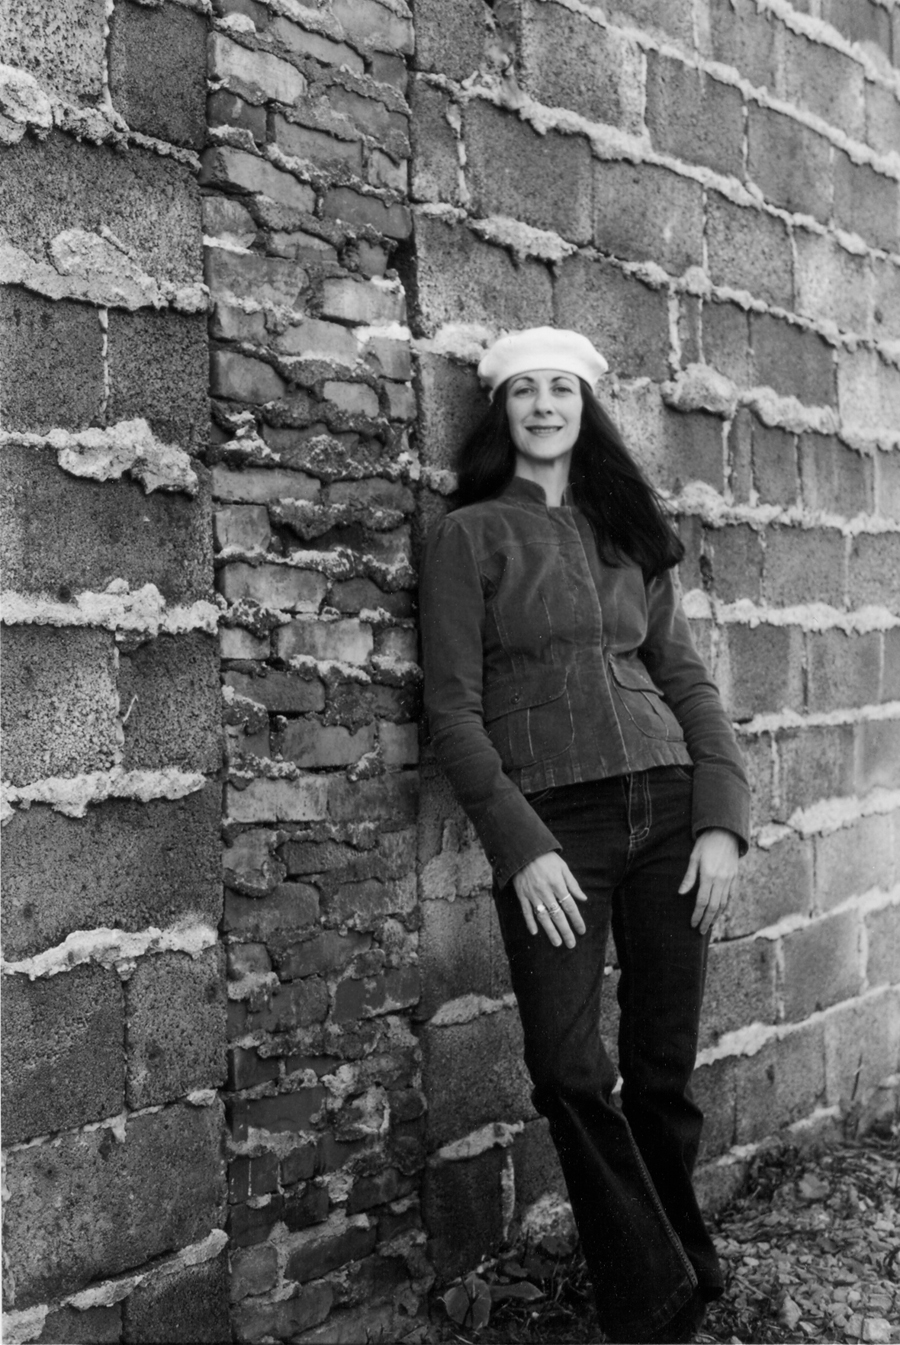 this is a large 300 dpi photo of the author Corso, leaning against a brick wall, for publicity use only.